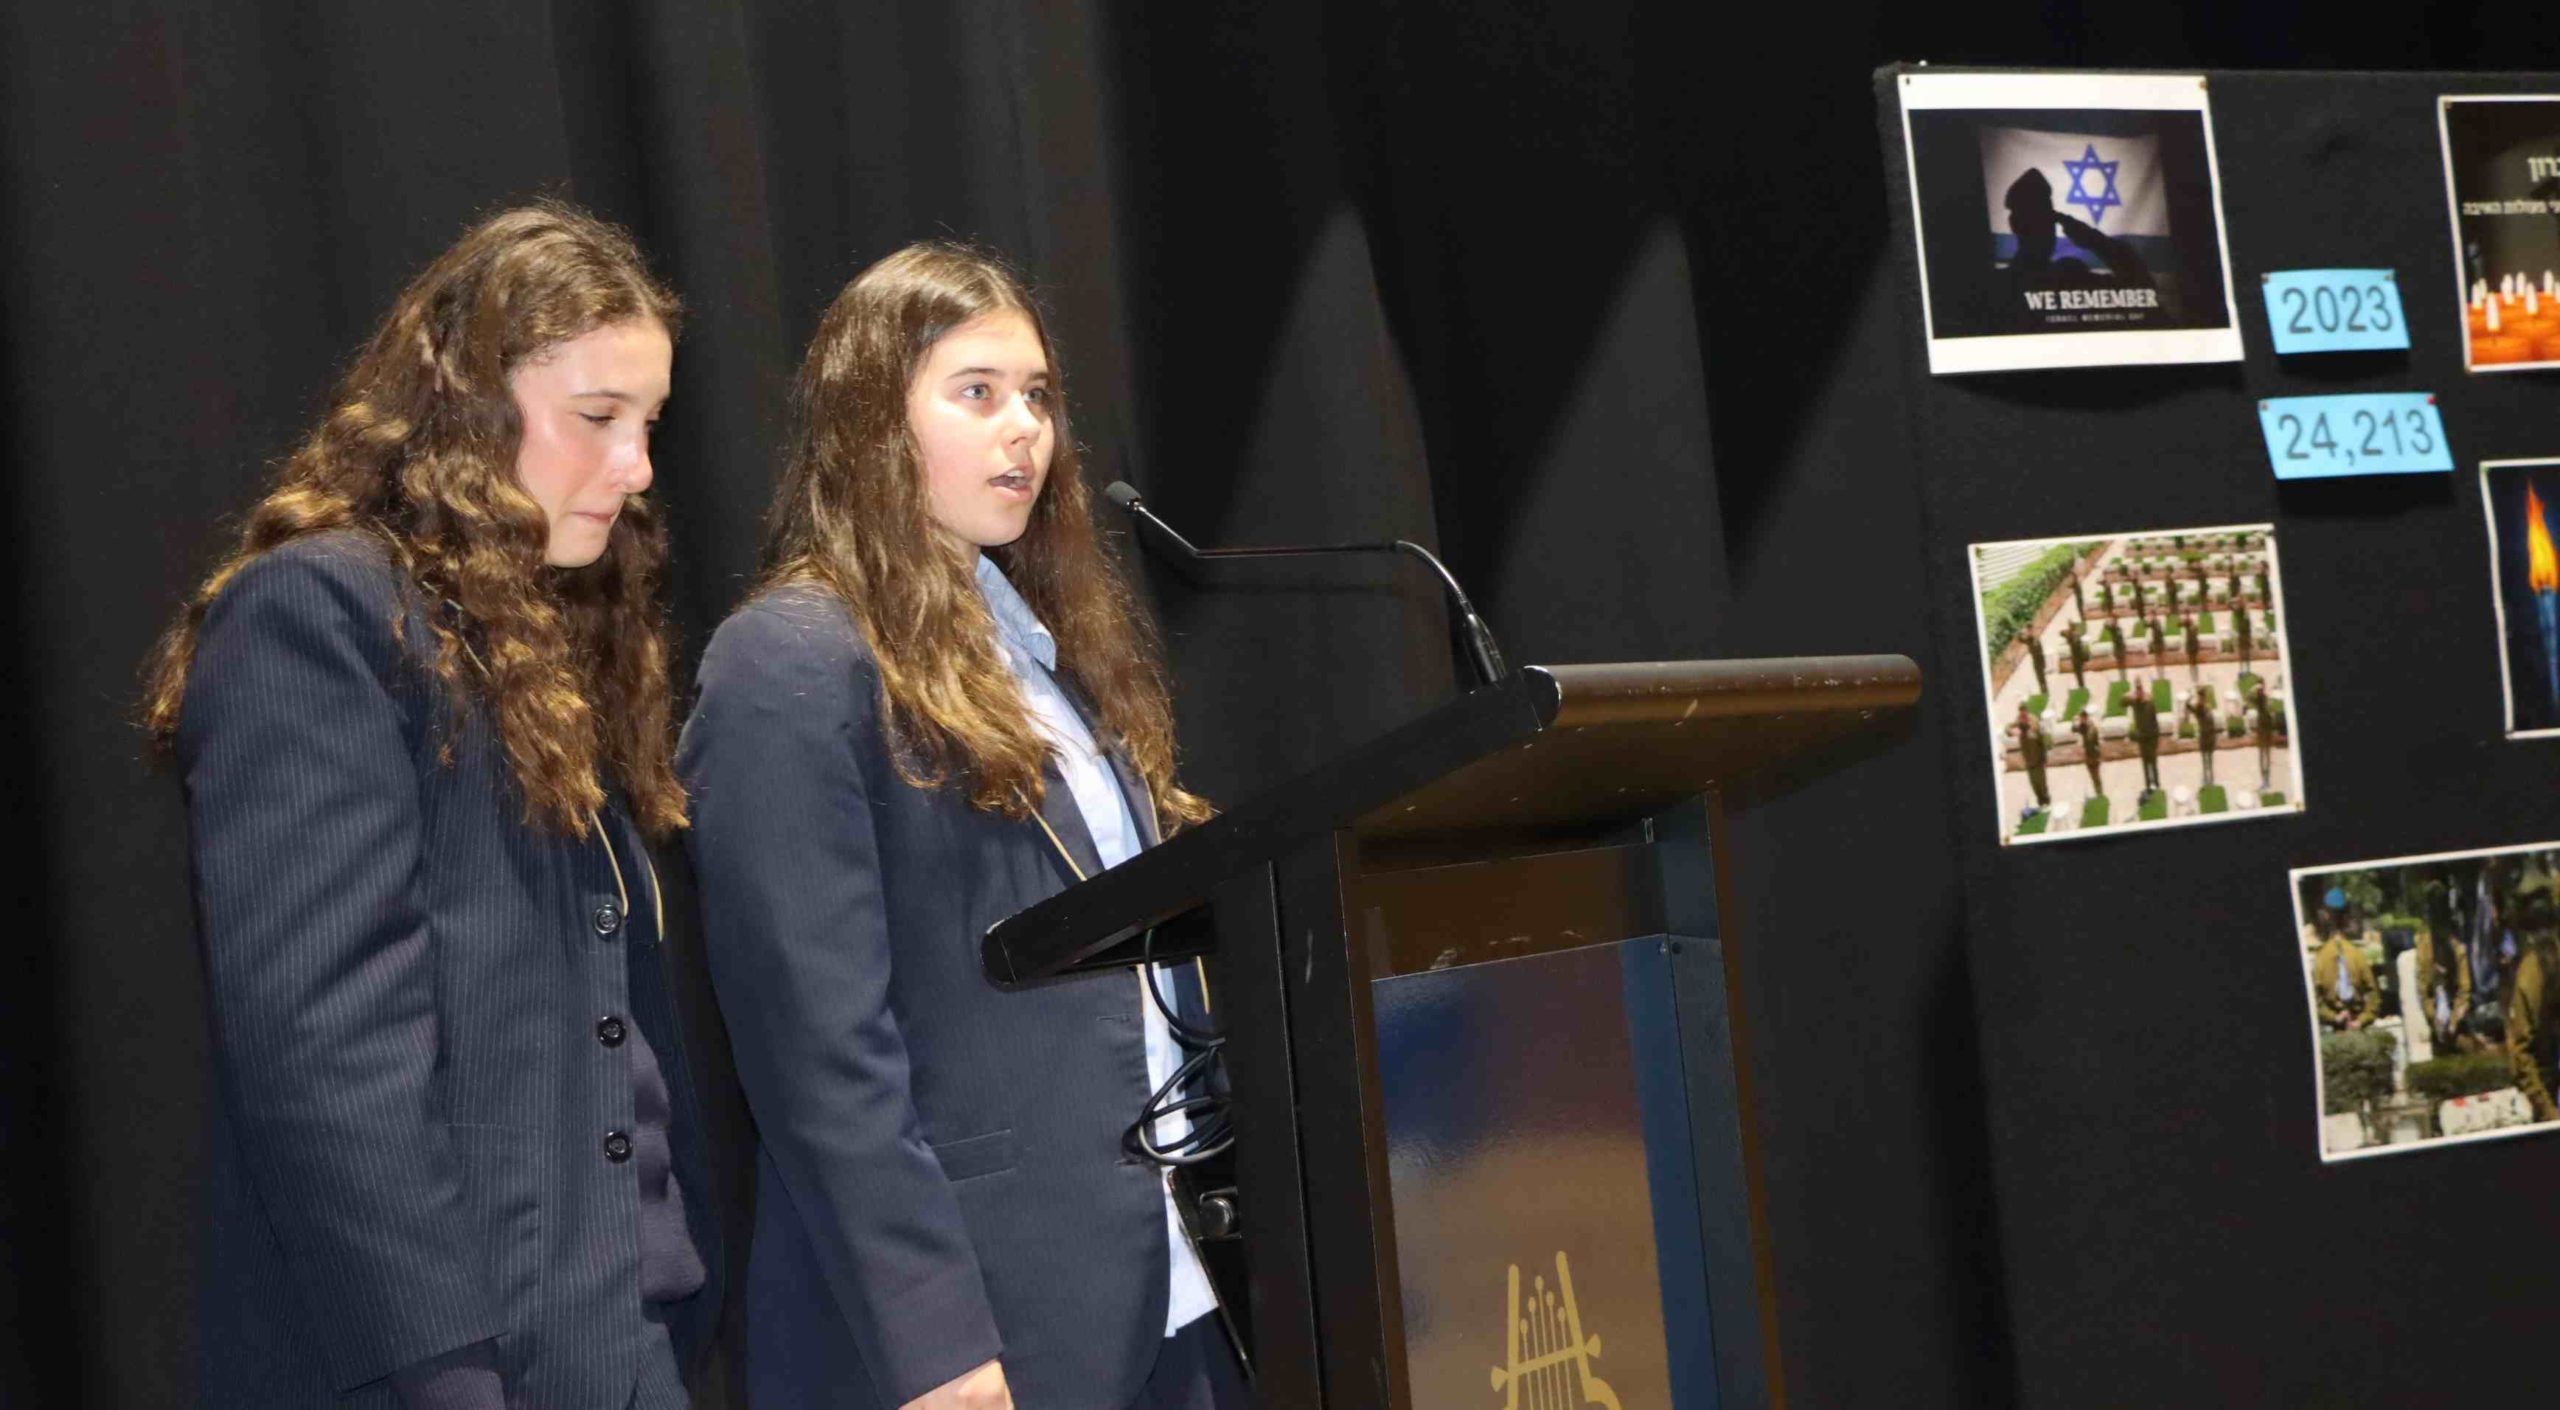 Two students are marking Yom HaZikaron. They look sad. One student looks down at the podium as she speaks.